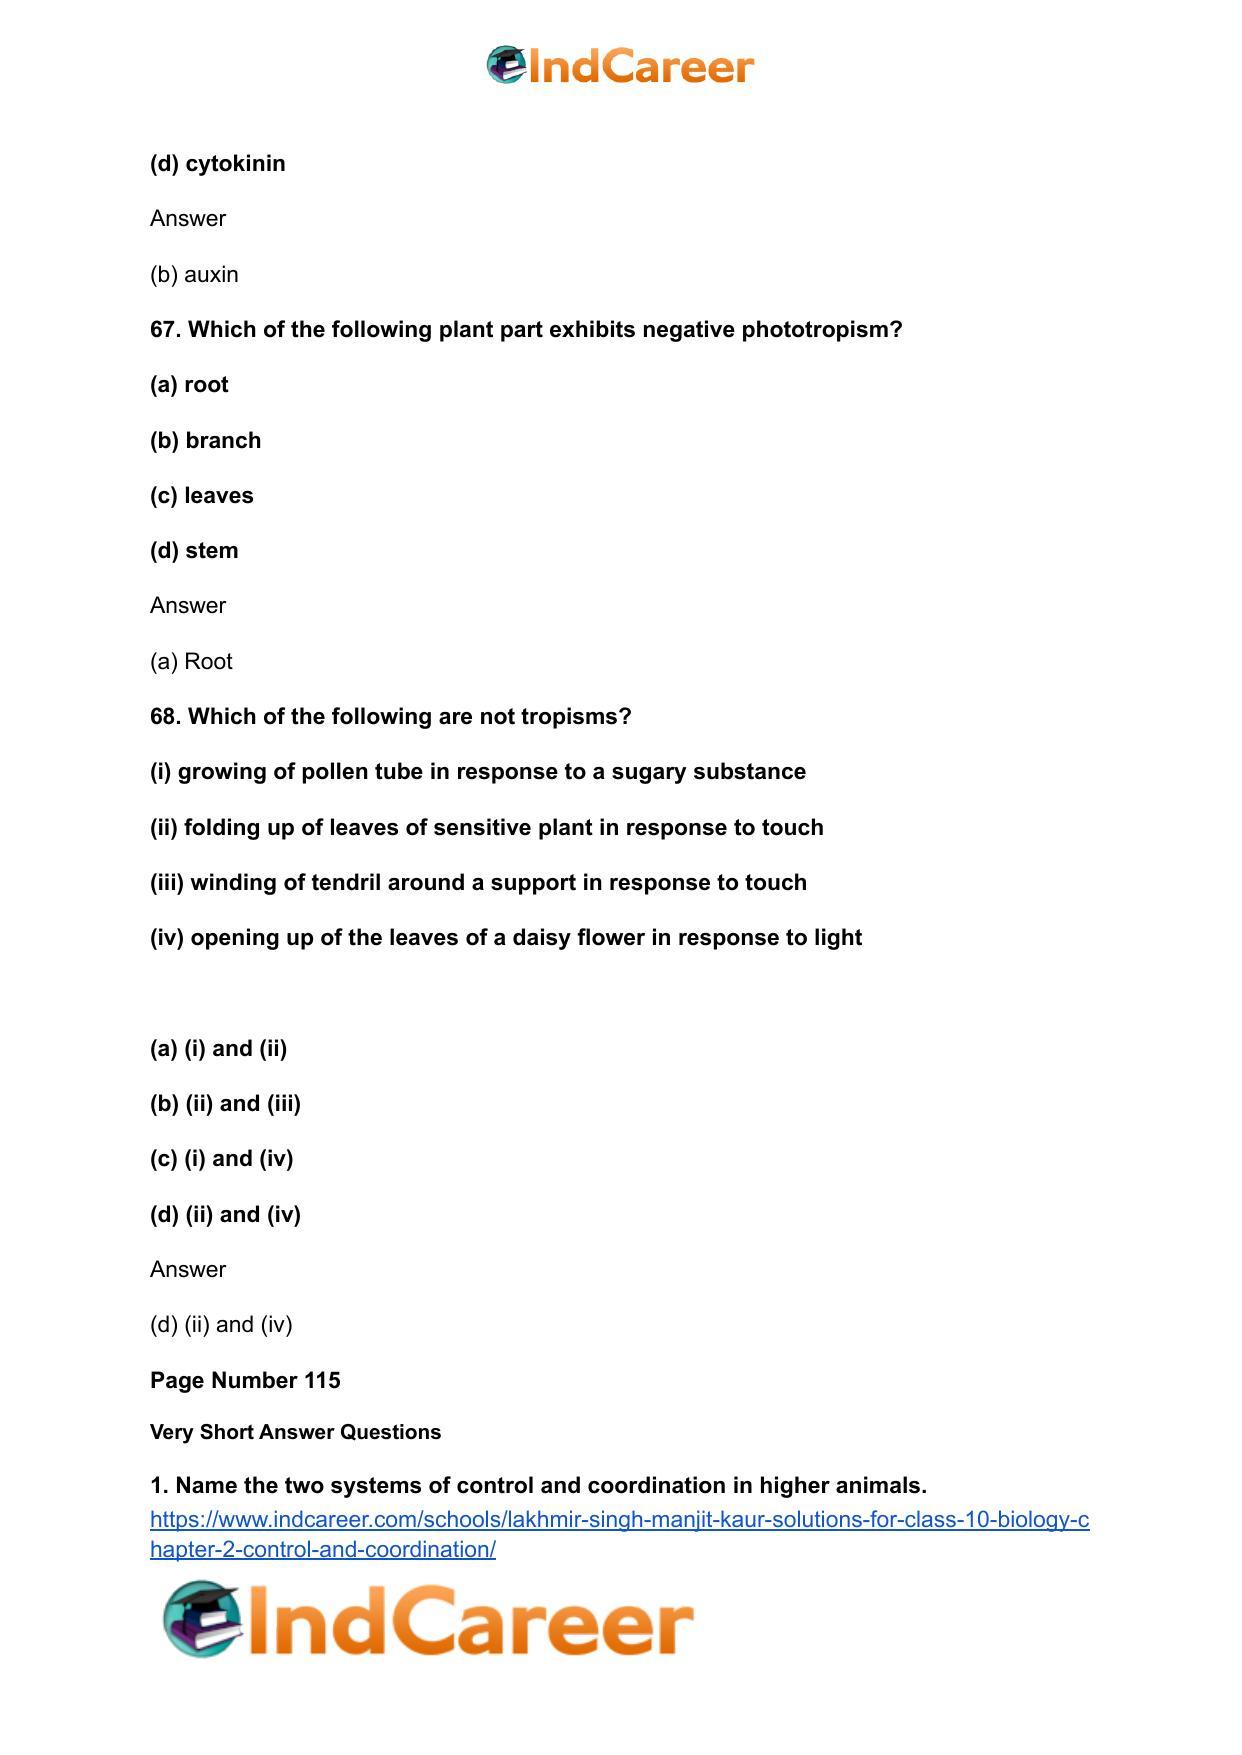 Lakhmir Singh Manjit Kaur  Solutions for Class 10 Biology: Chapter 2- Control And Coordination - Page 27